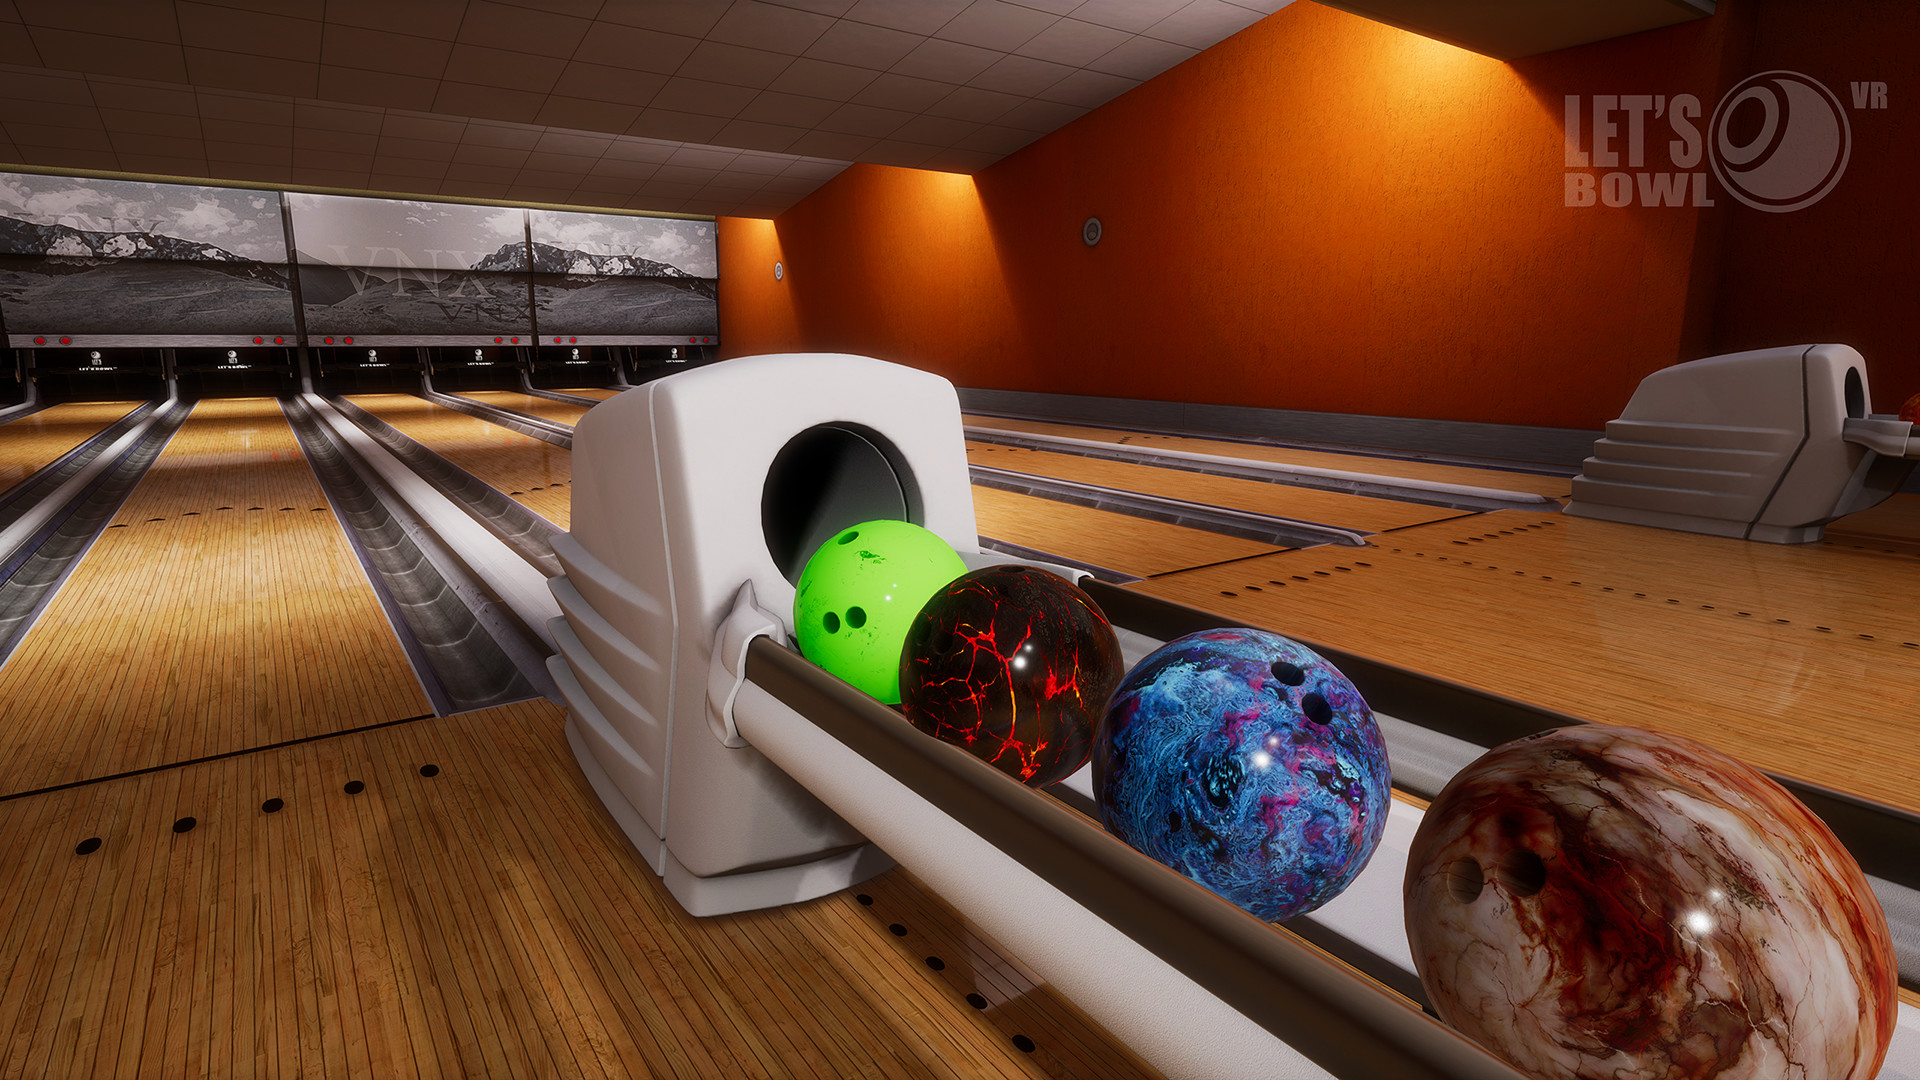 Let's Bowl VR - Bowling Game on Steam